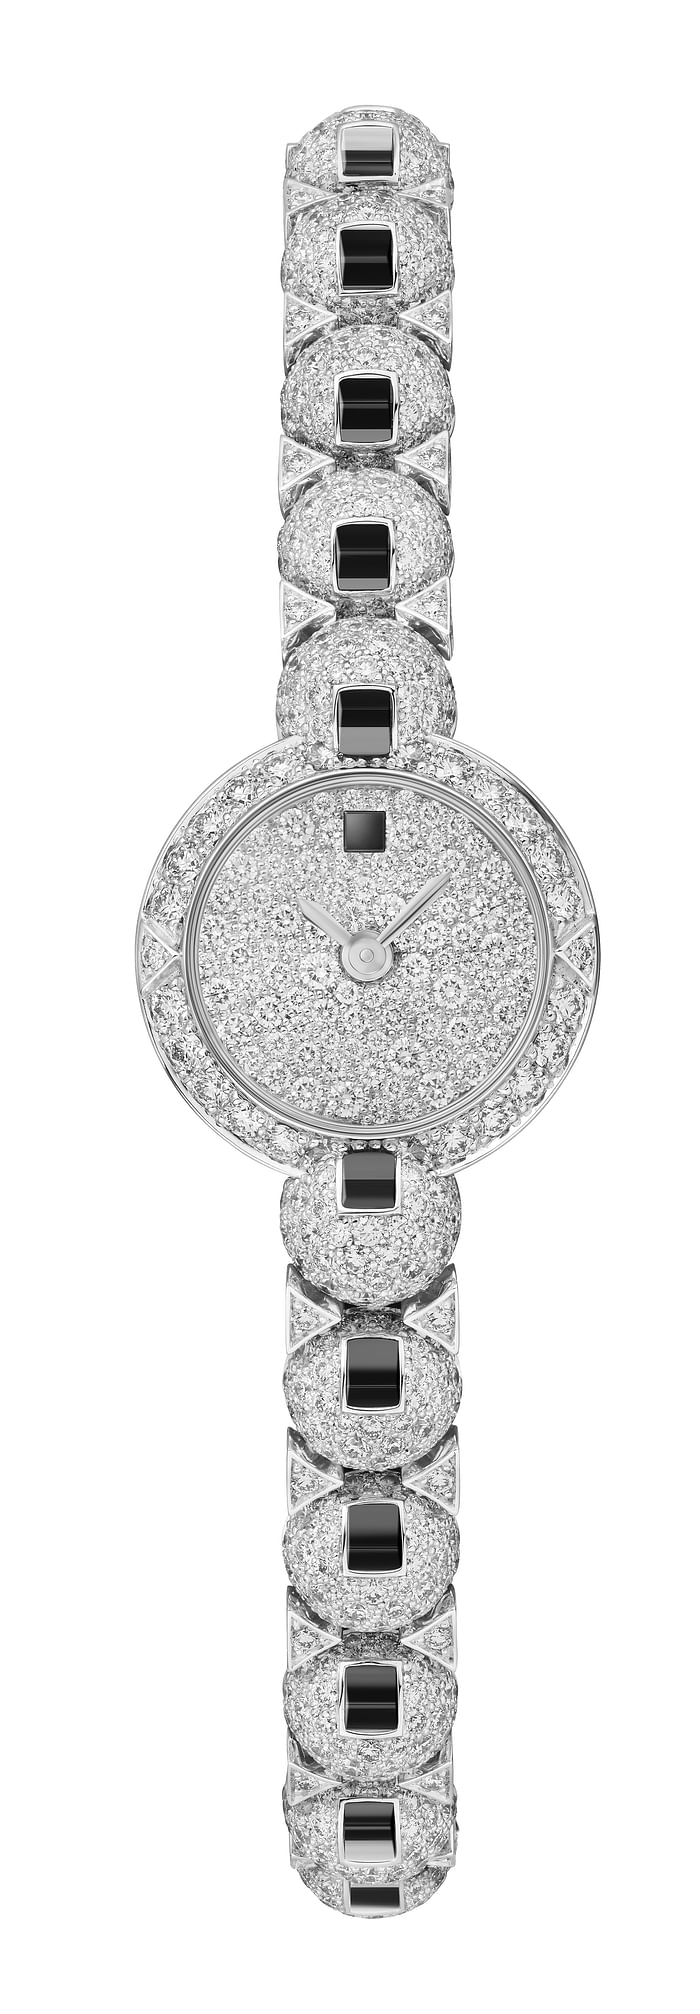 Cartier Rosary Watch